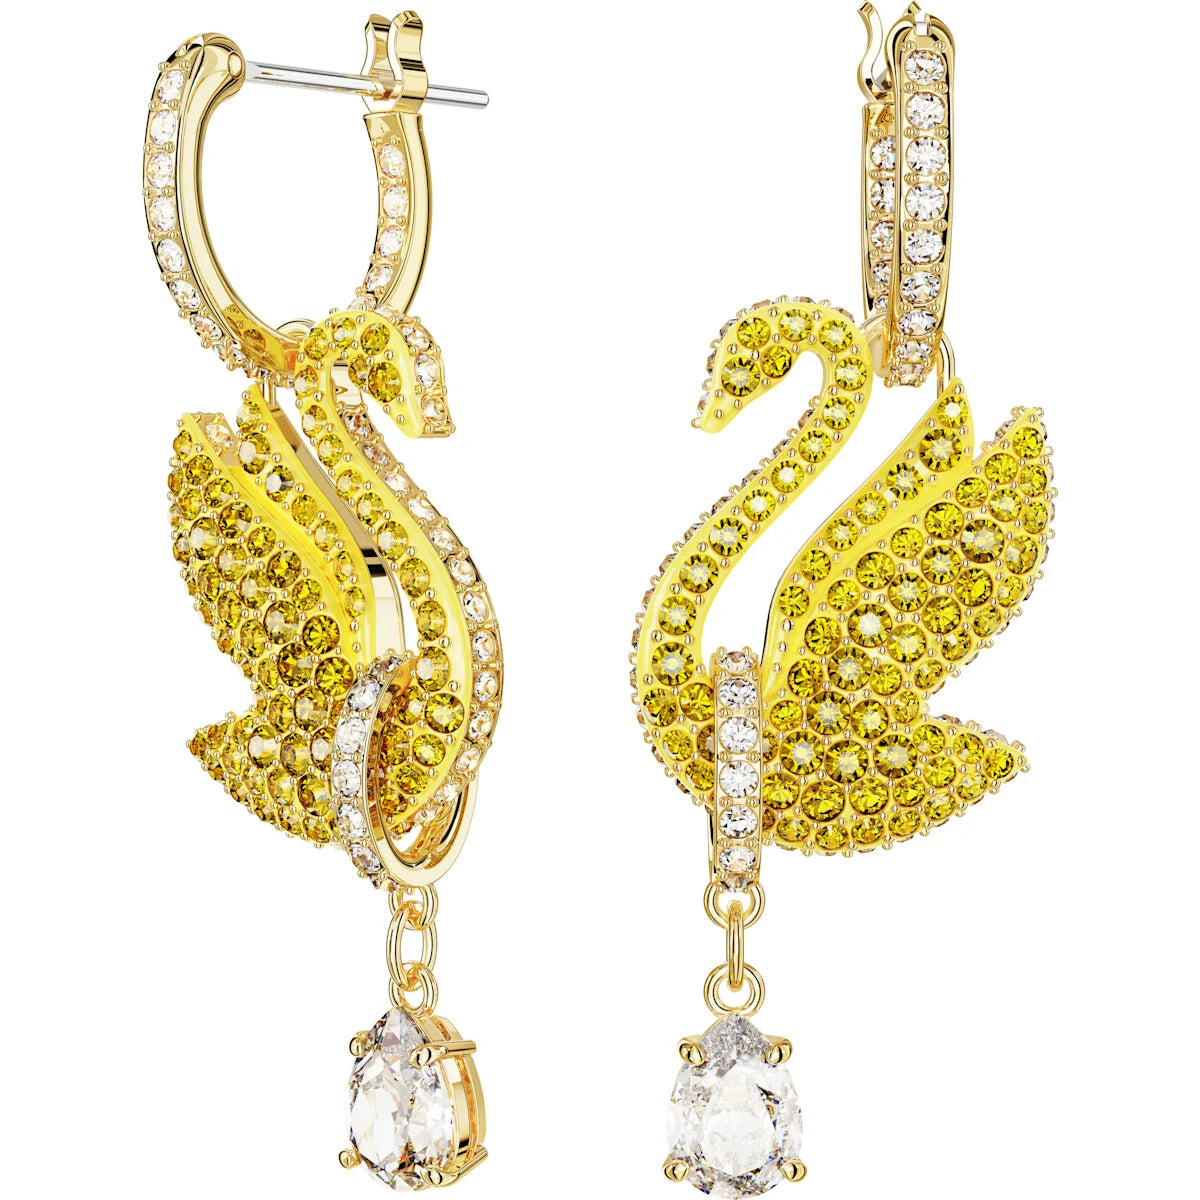 Swarovski Iconic Swan drop earrings, Swan, Yellow, Gold-tone plated 5647543- Discontinued